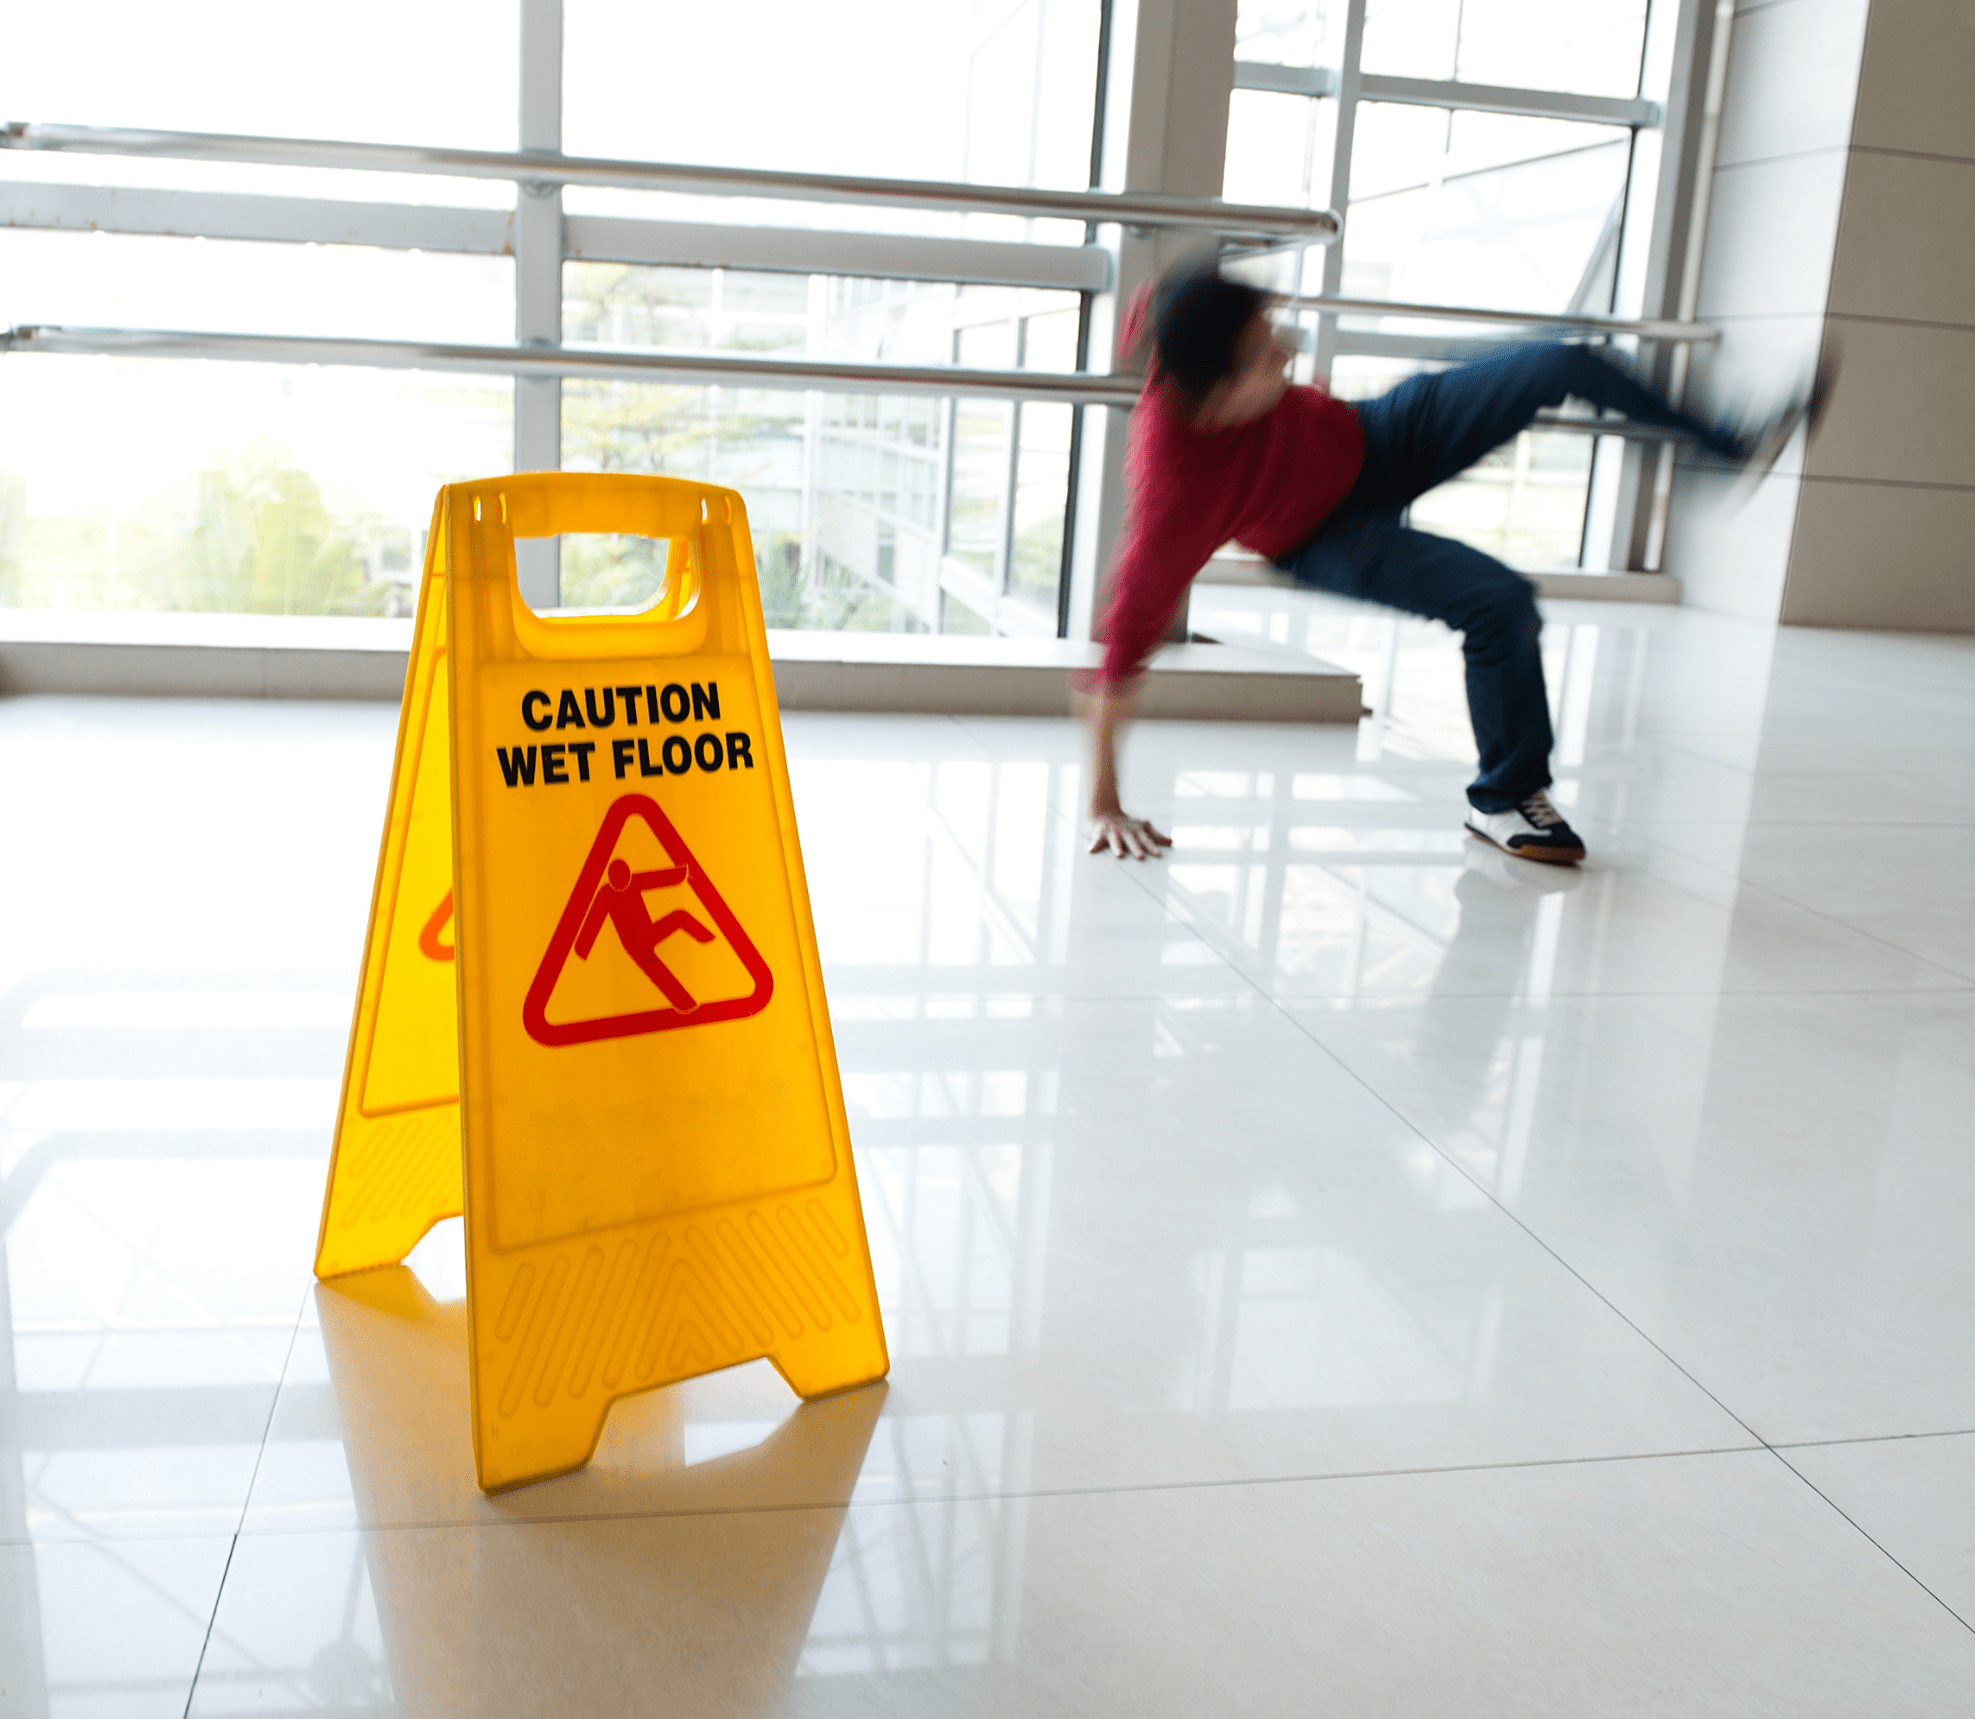 slip and fall accident - medical bills